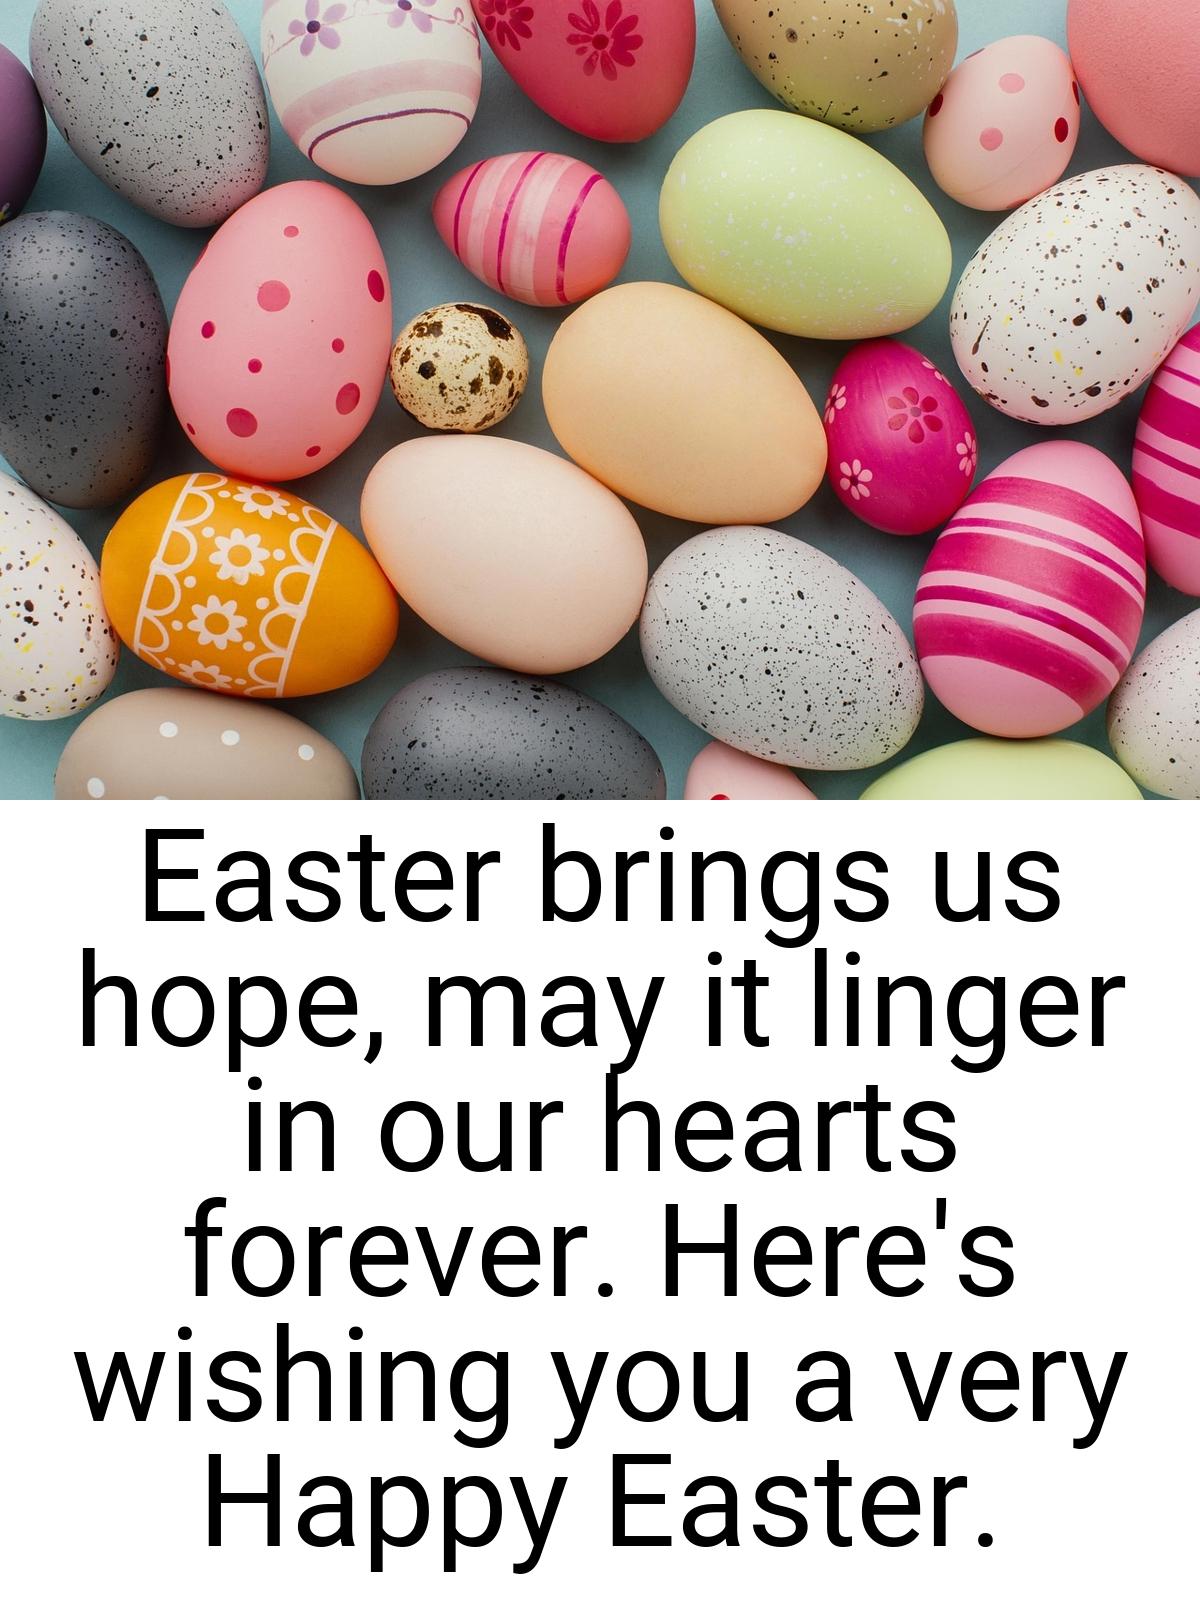 Easter brings us hope, may it linger in our hearts forever